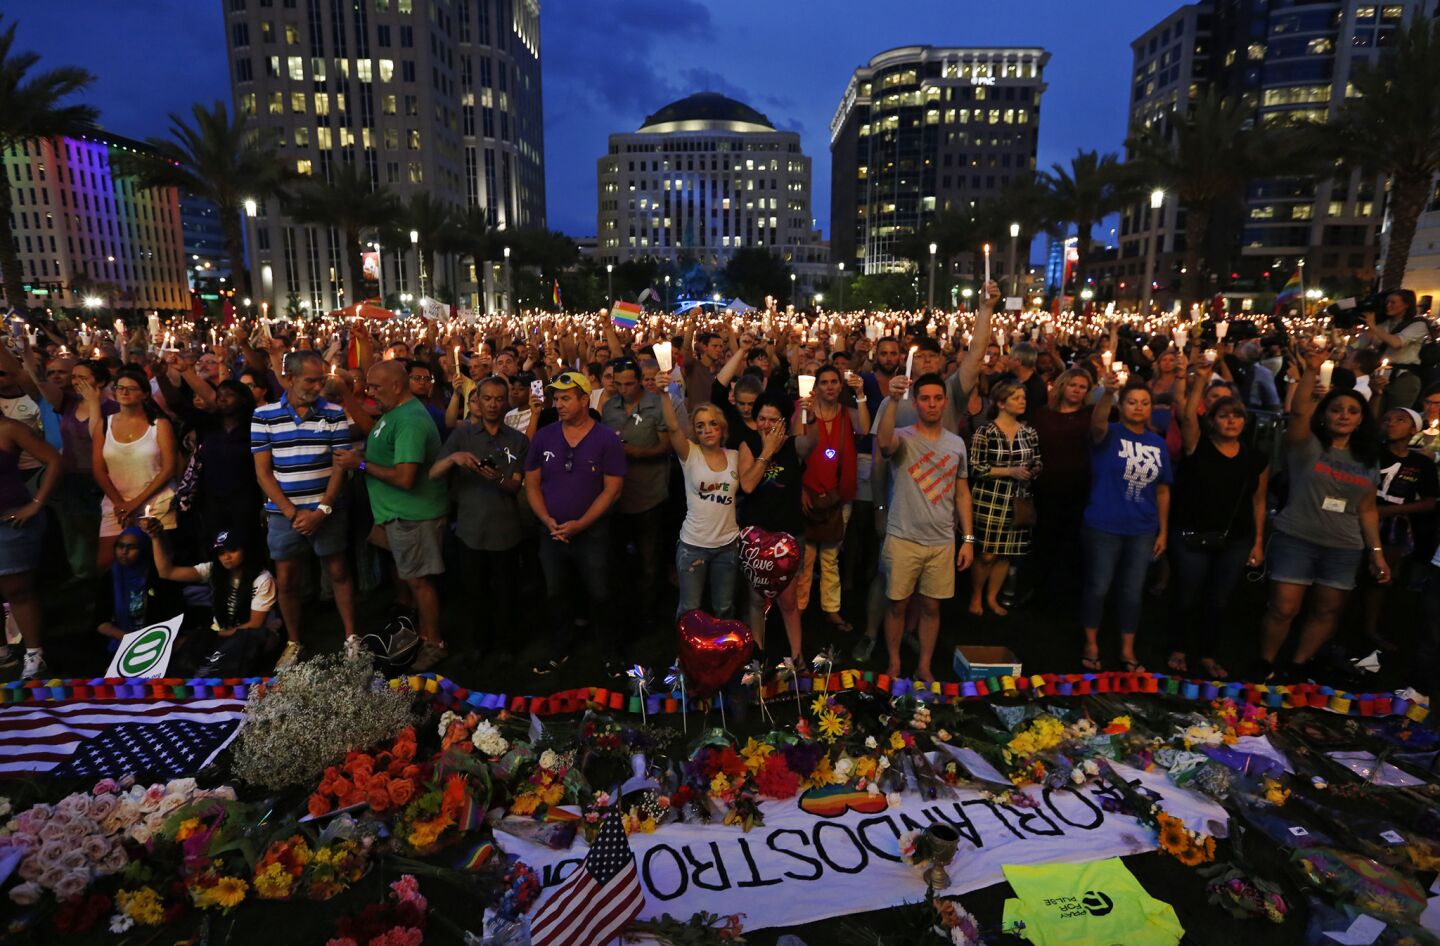 Thousands gather for a memorial at the Plaza at the Dr. Phillips Performing Arts Center in downtown Orlando on June 13, 2016, to honor those killed and wounded in the Pulse nightclub attack.